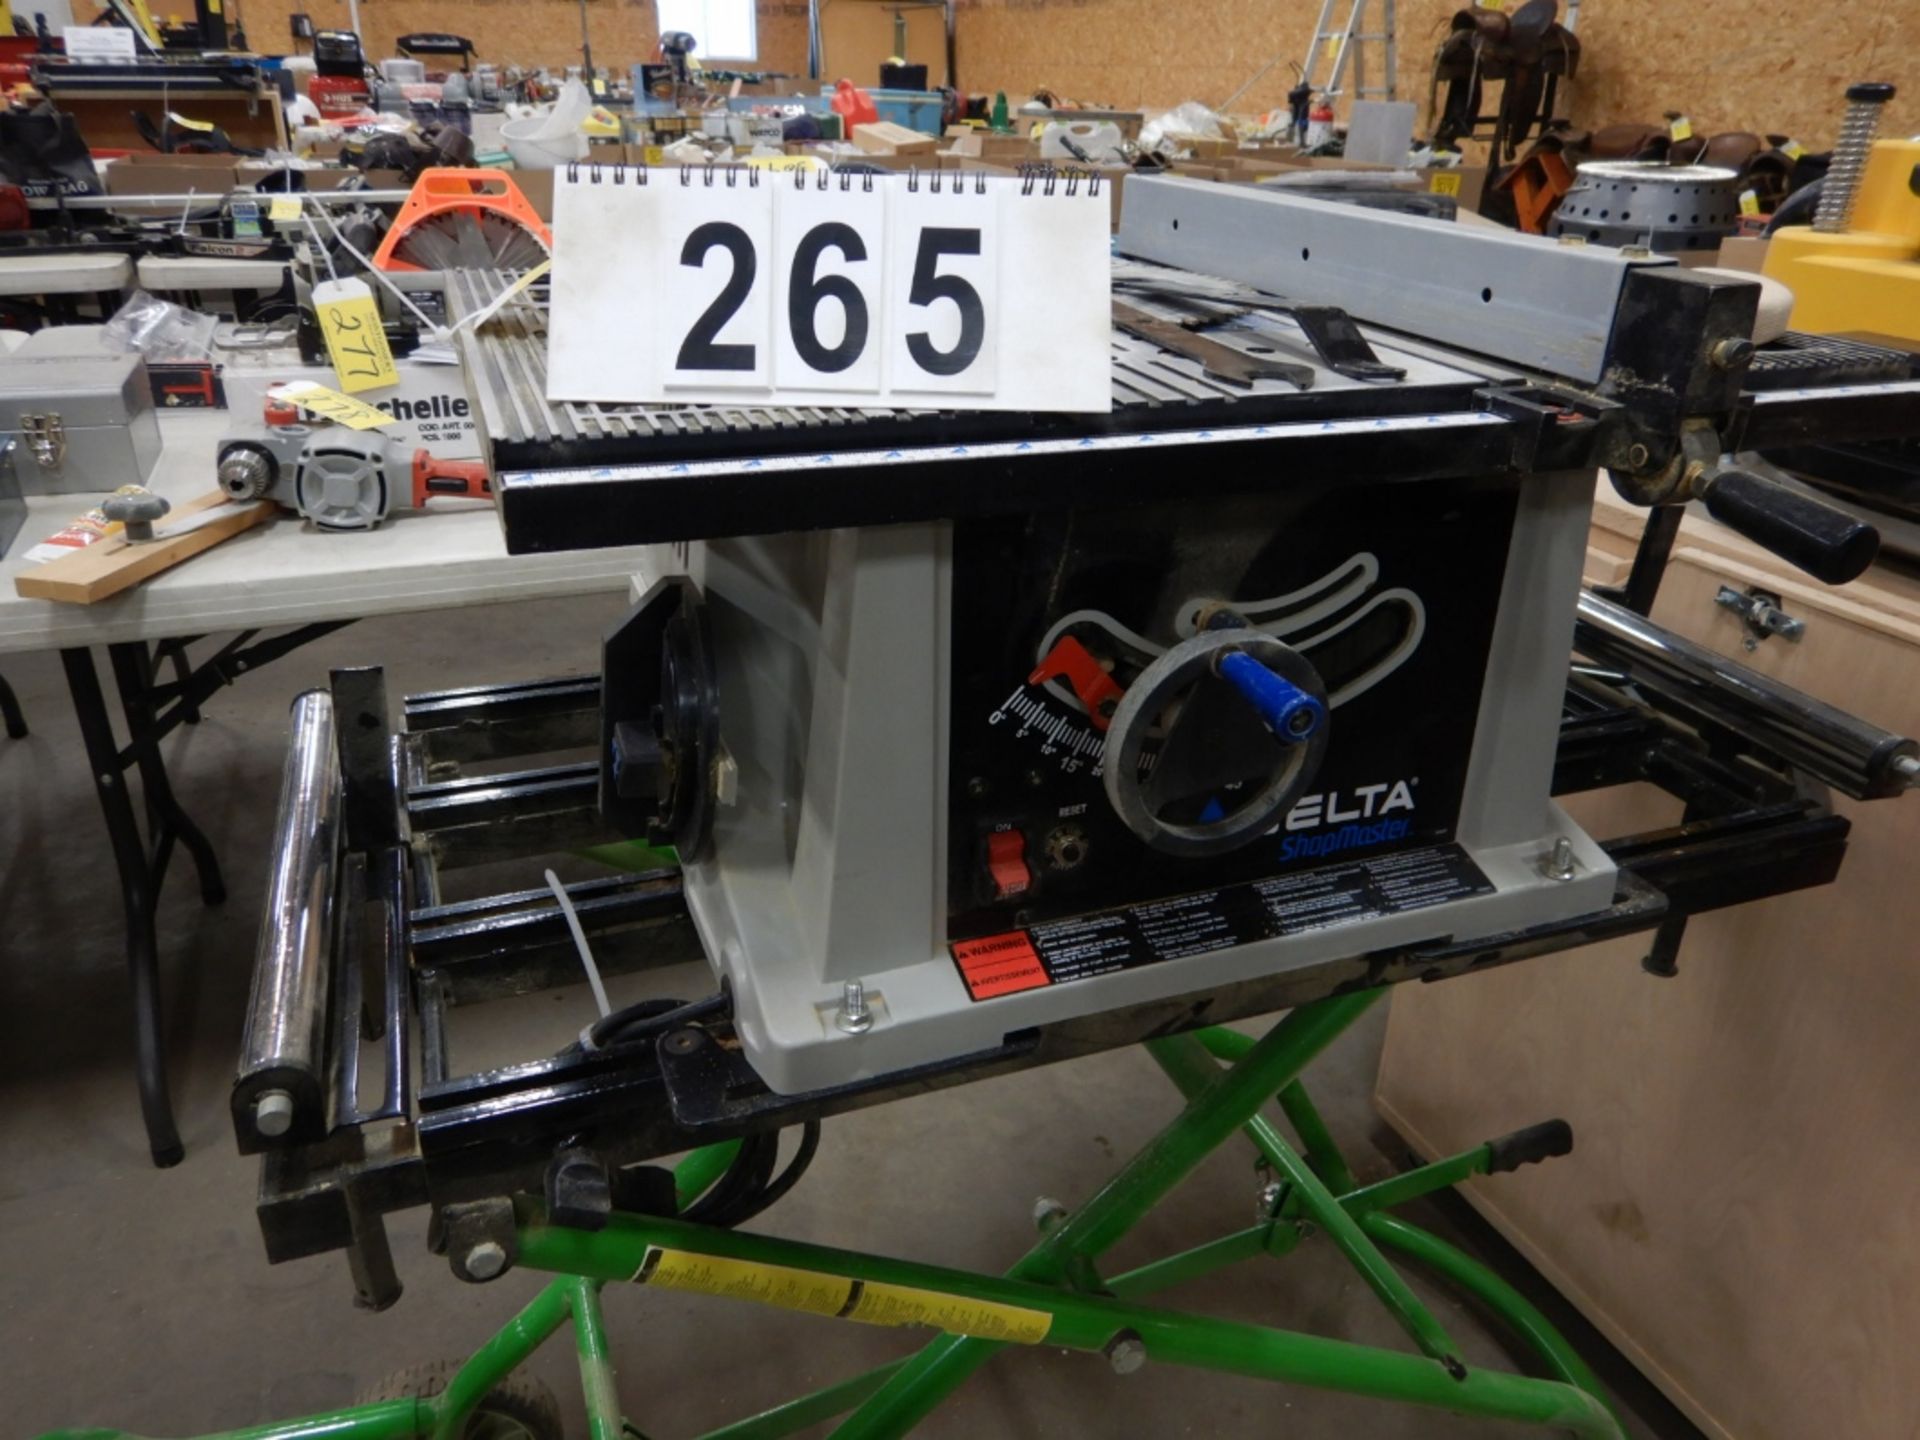 DELTA SHOP MASTER 10" TABLE SAW W/PORTABLE SAW STAND W/ INFEED-OUTFEED ROLLERS - Image 2 of 5